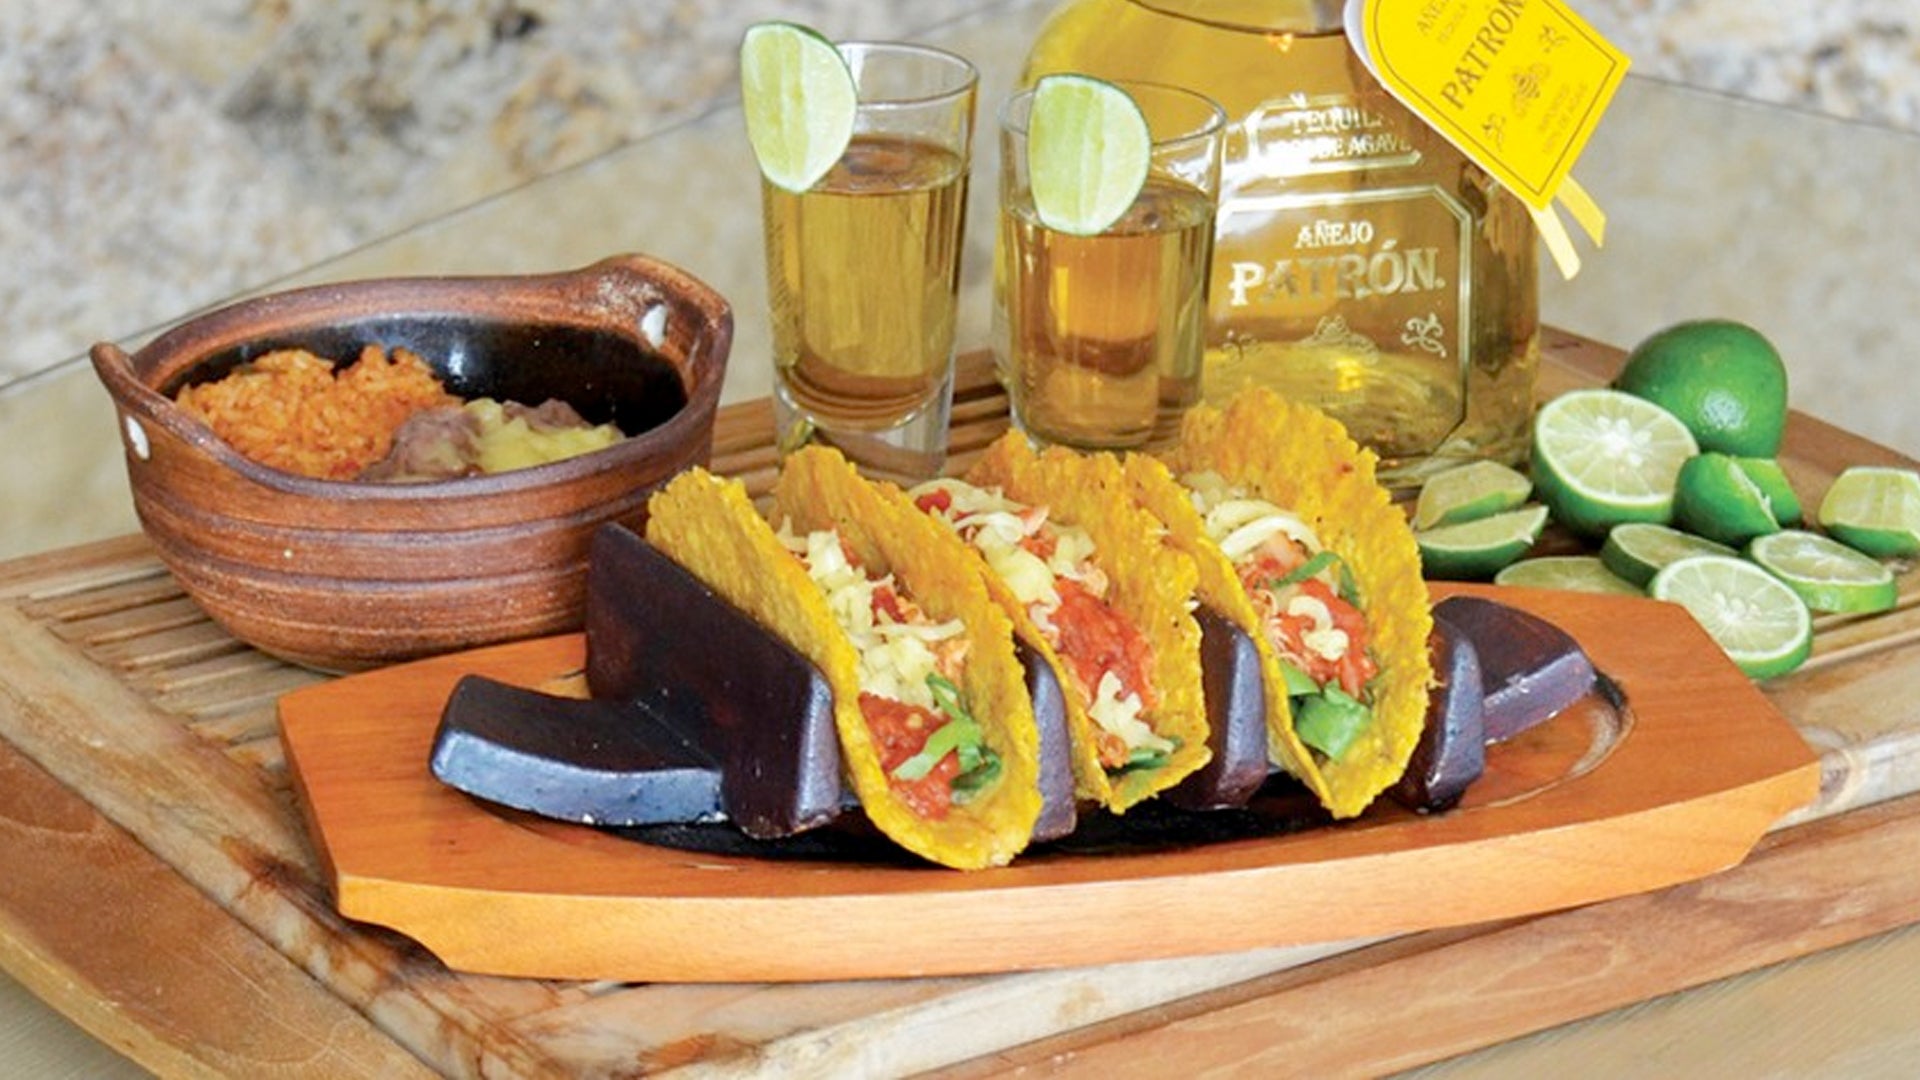 How to Pair Tequila with Food? Here's the Recommendation!